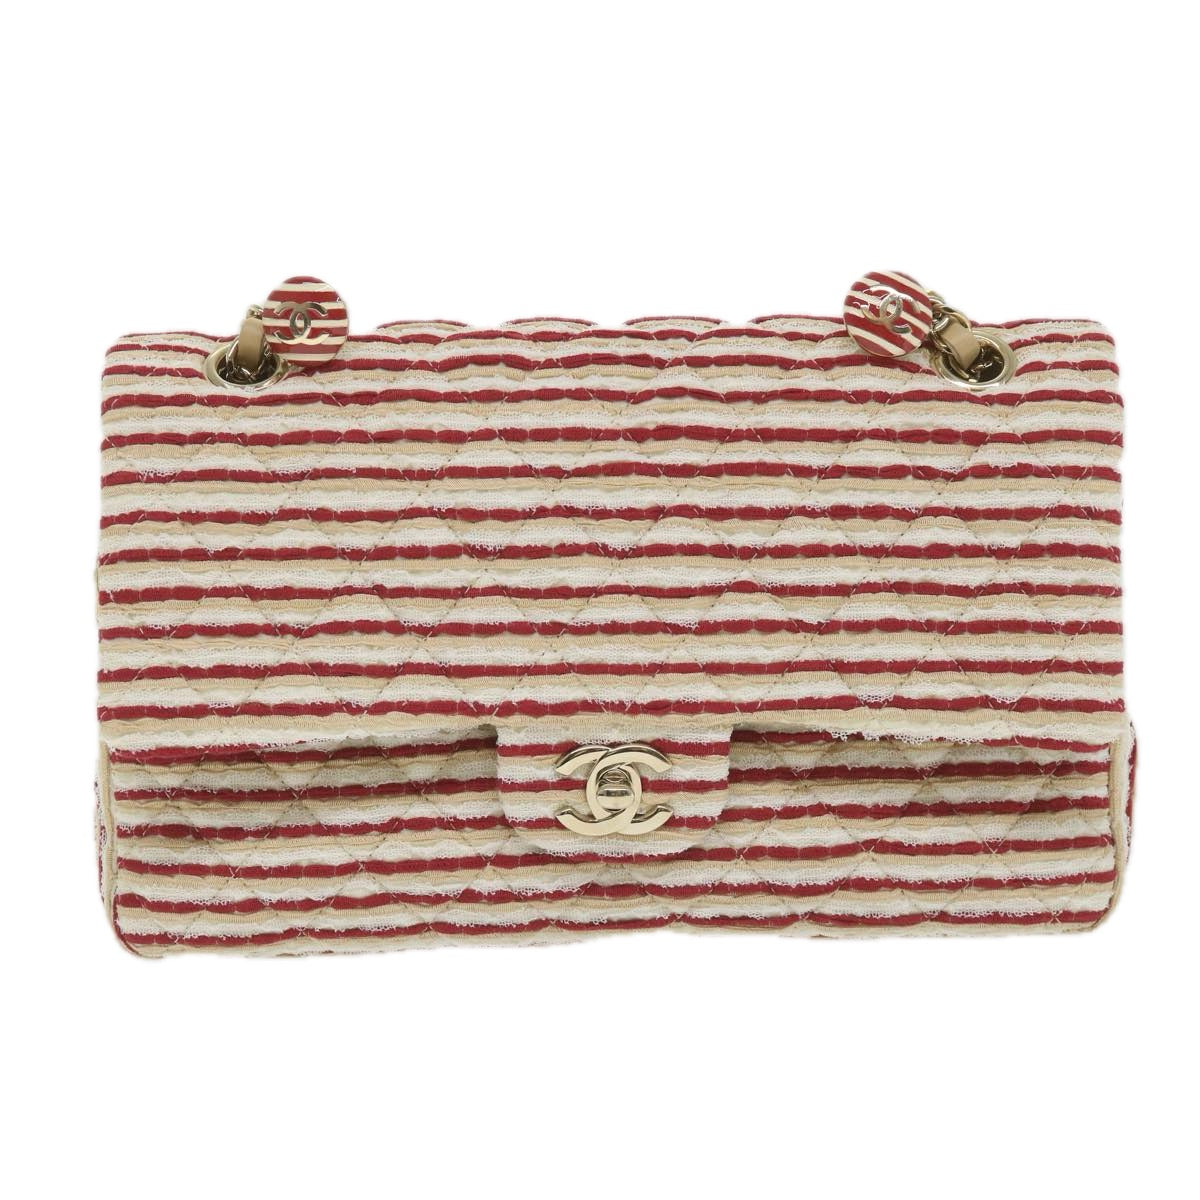 Chanel Quilted Matelasse Chain Shoulder Bag Canvas Red Beige Cc Auth 58343s